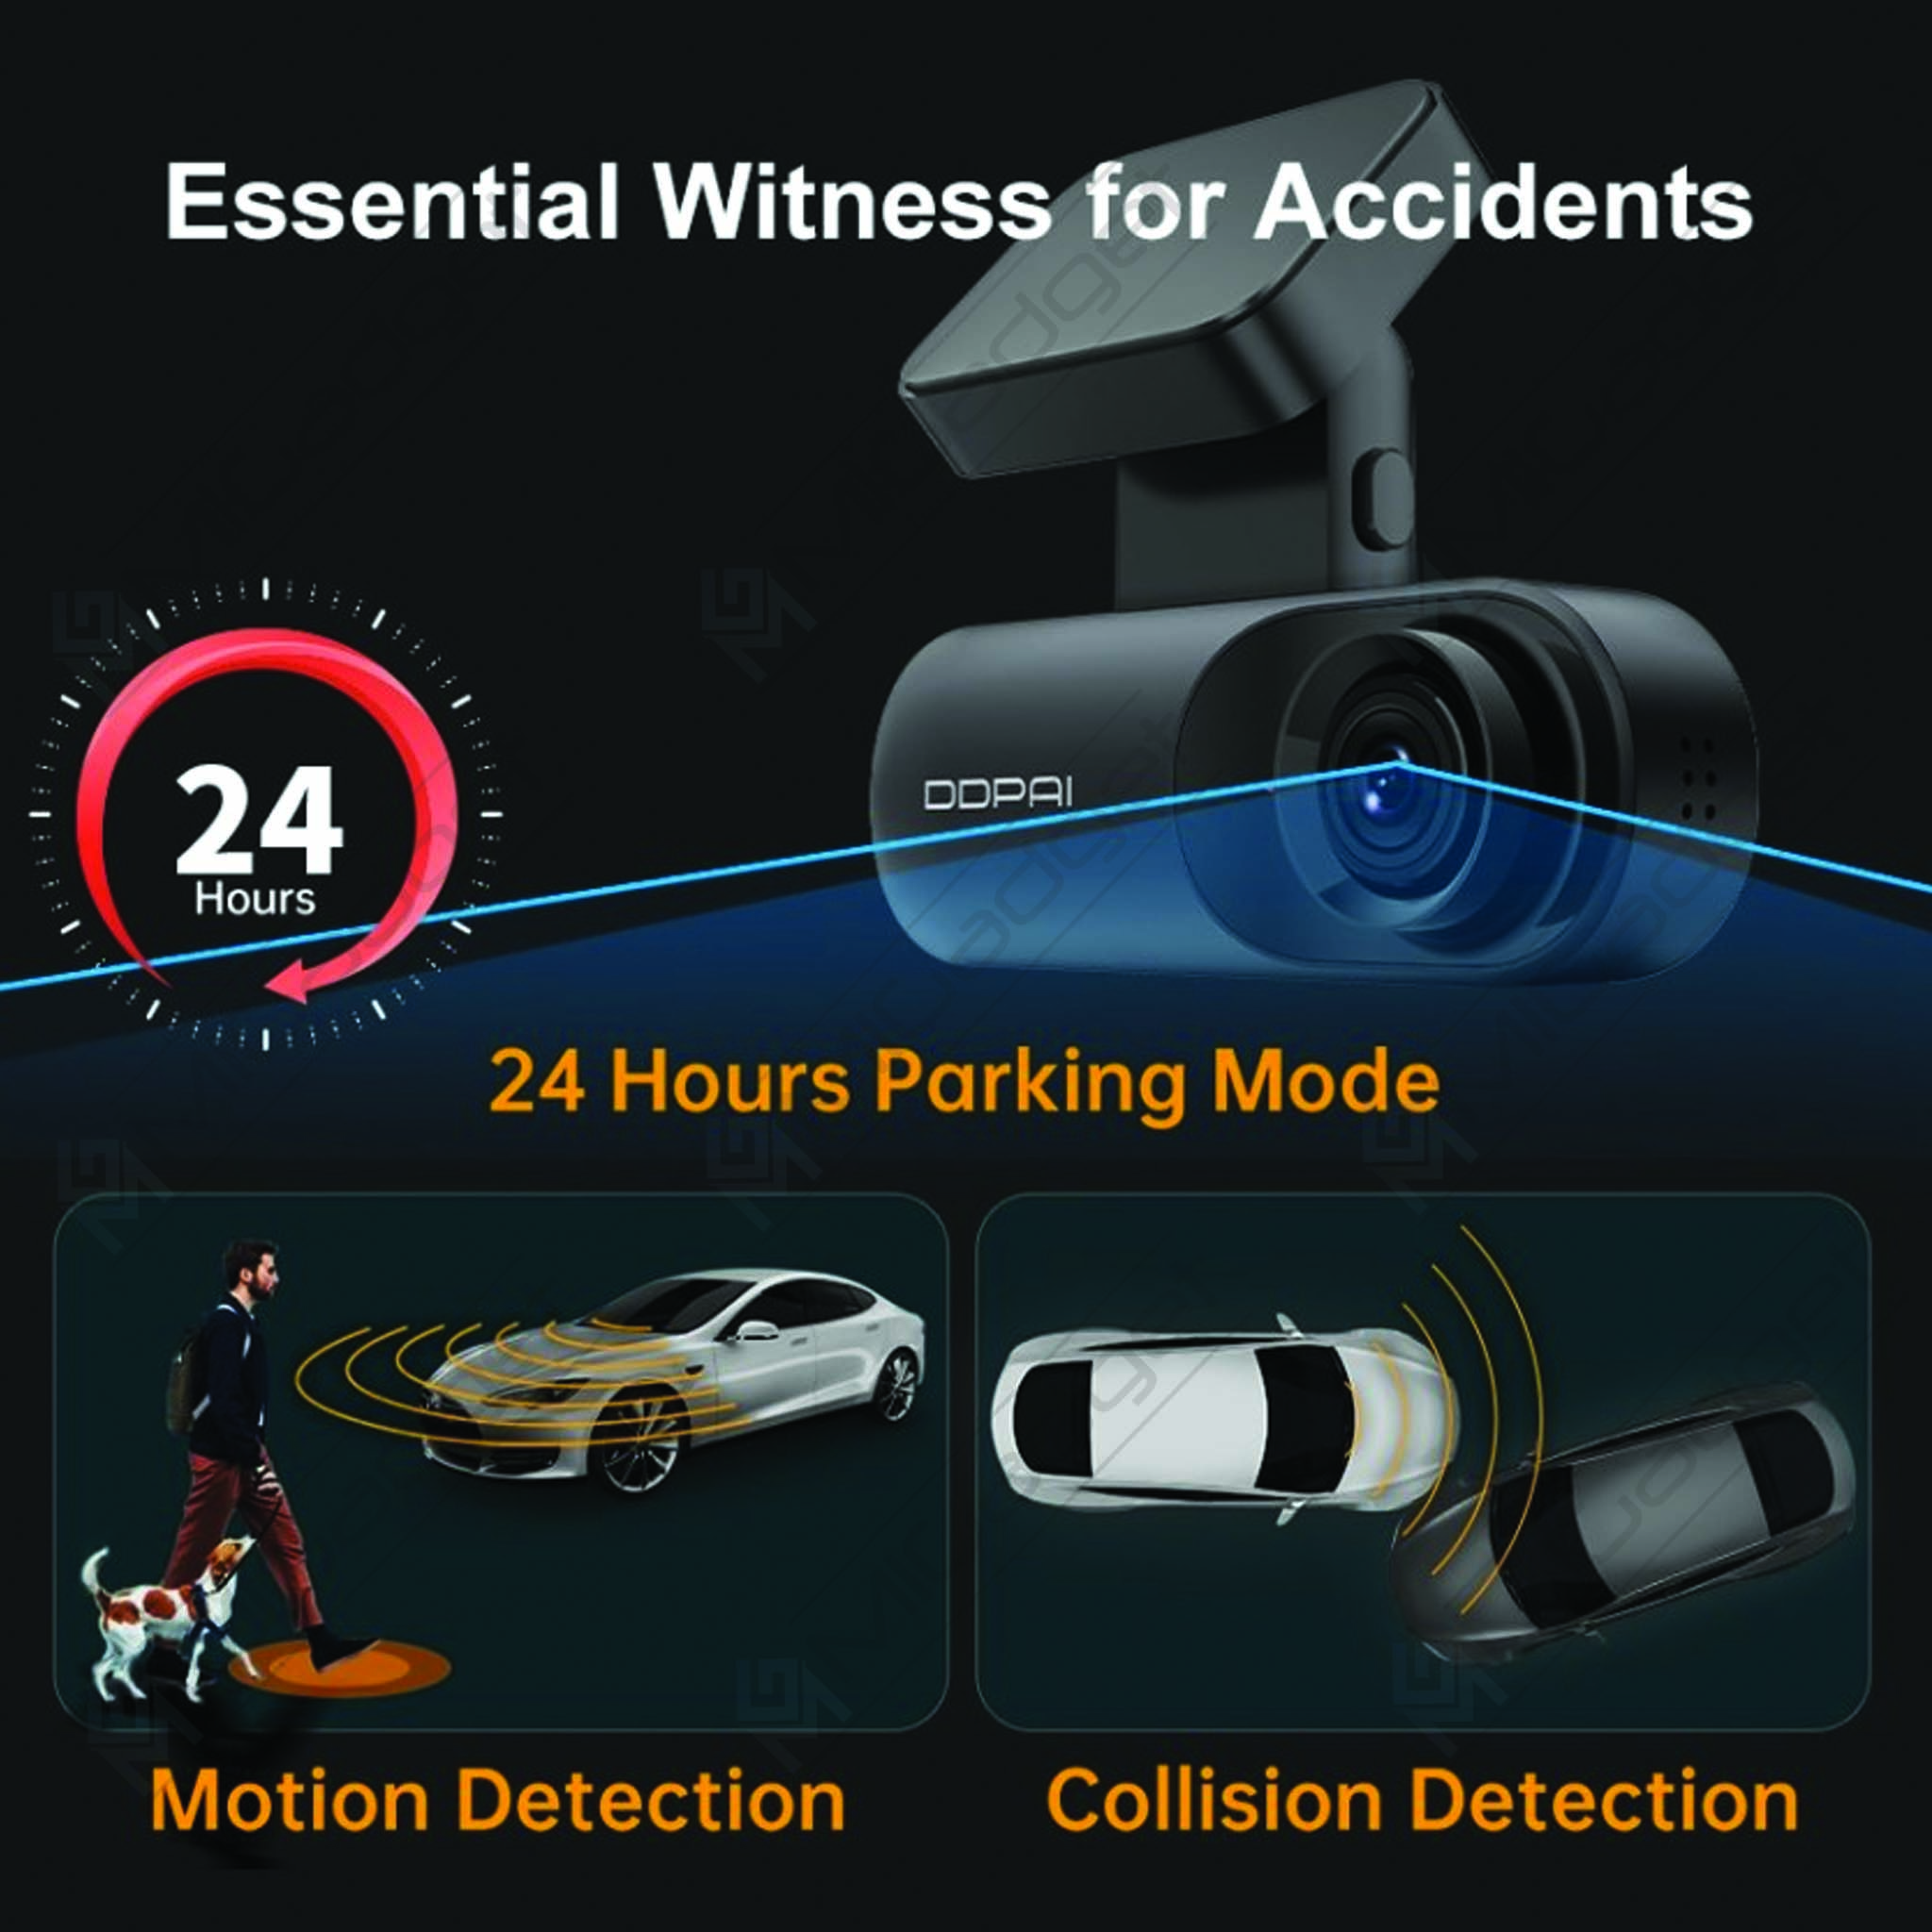 DDPAI Dash Cam Driving Recorder Car On-Dash Mounted Cameras with Super  Night Vision 1600P Wi-Fi G-Sensor WDR Loop Recording Motion Detection  Parking Monitor 